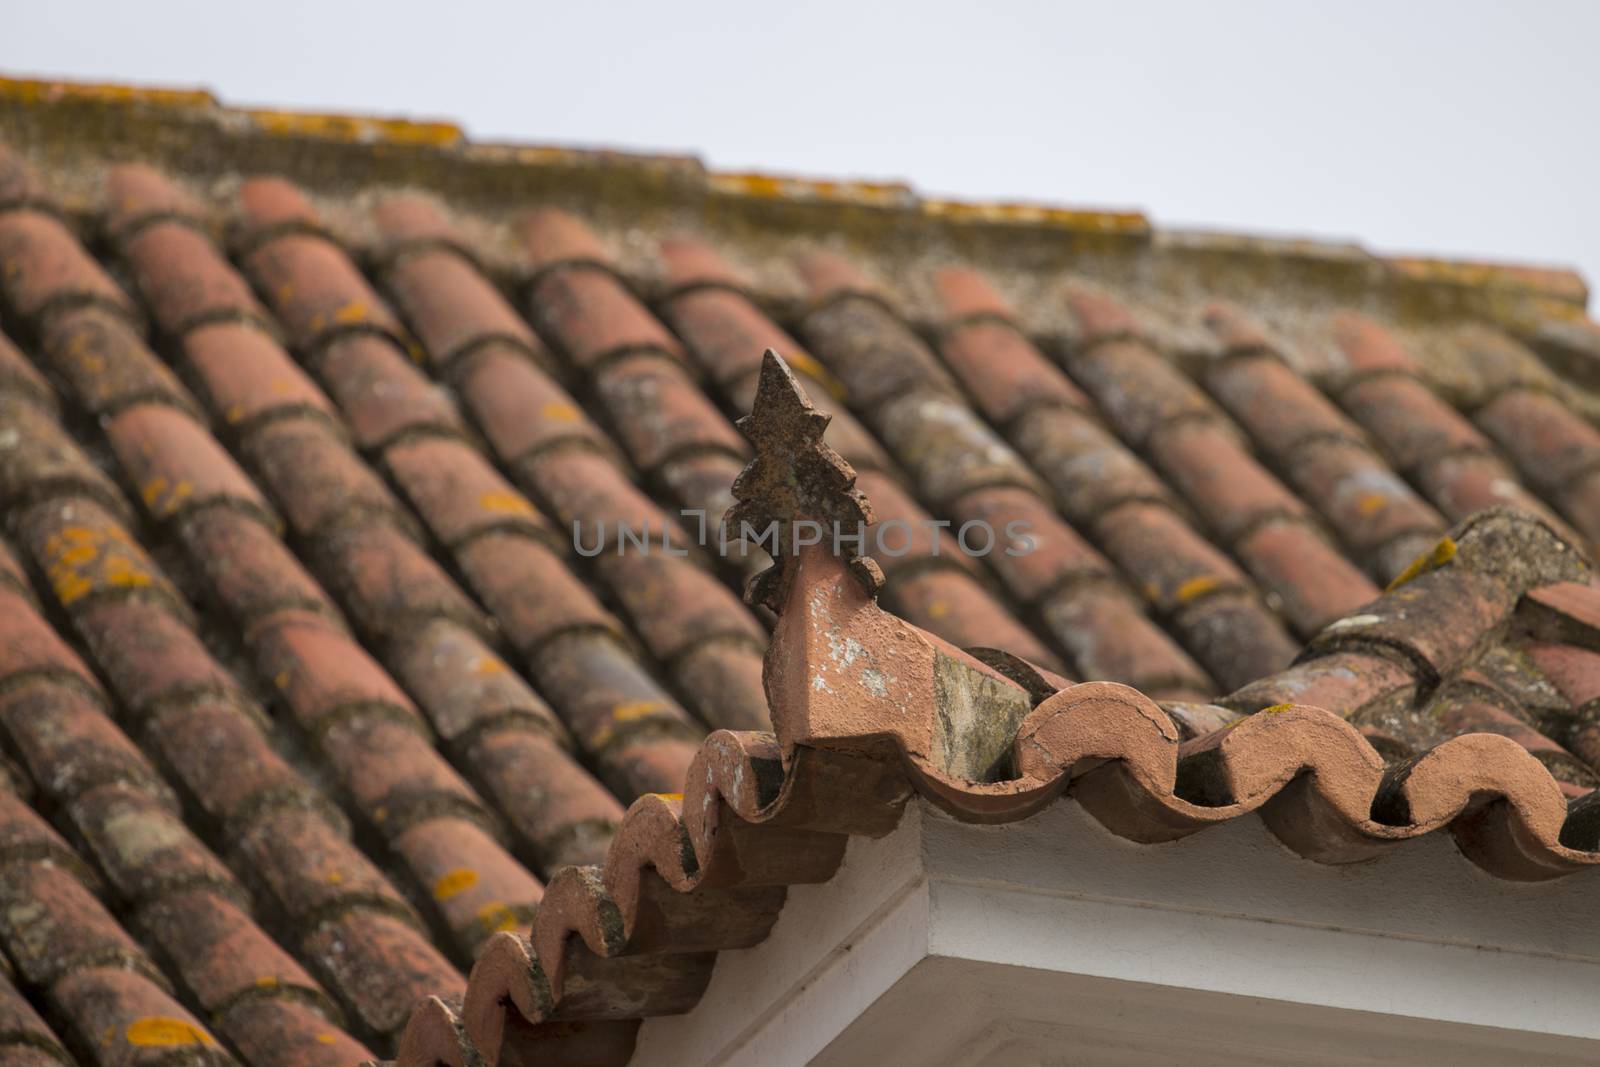 View of a typical Portuguese red tile roof.